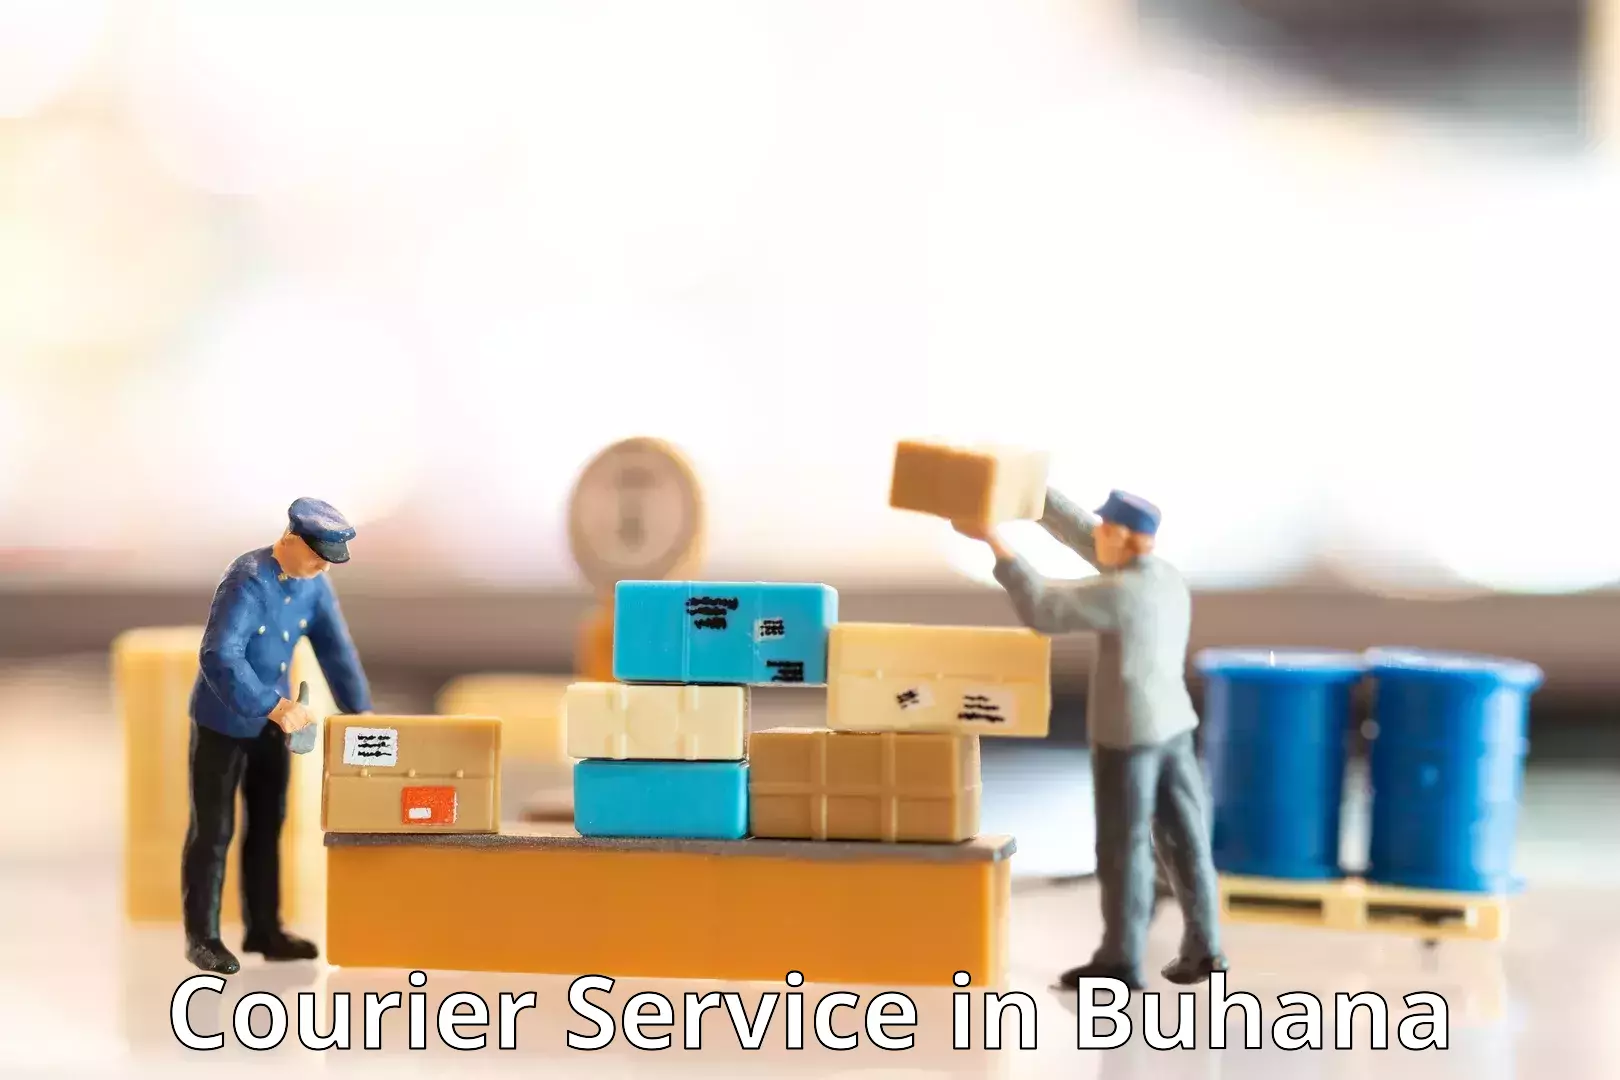 Trackable shipping service in Buhana